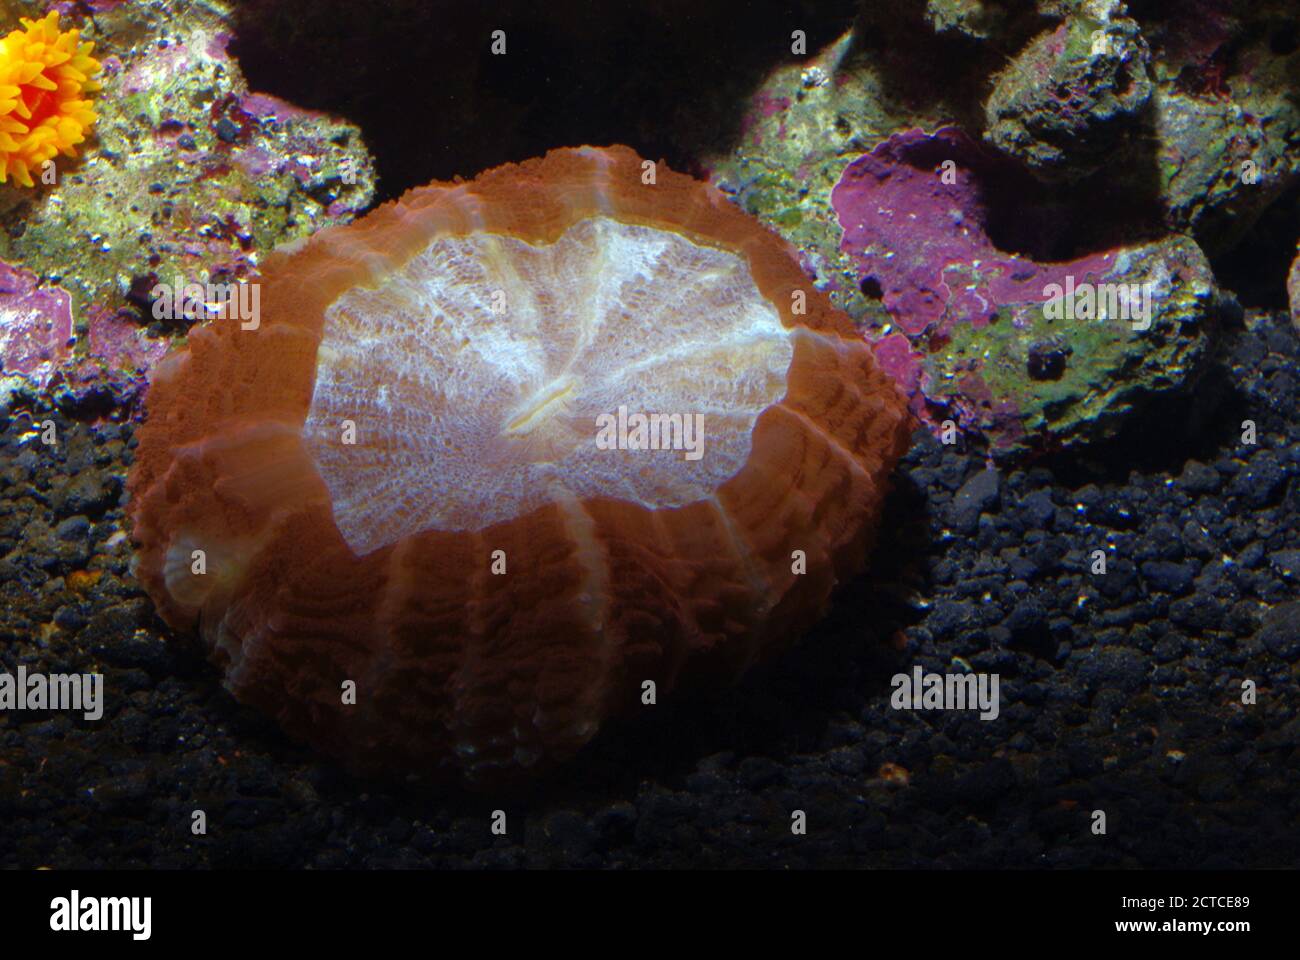 Button or scoly coral, Scolymia sp. Stock Photo